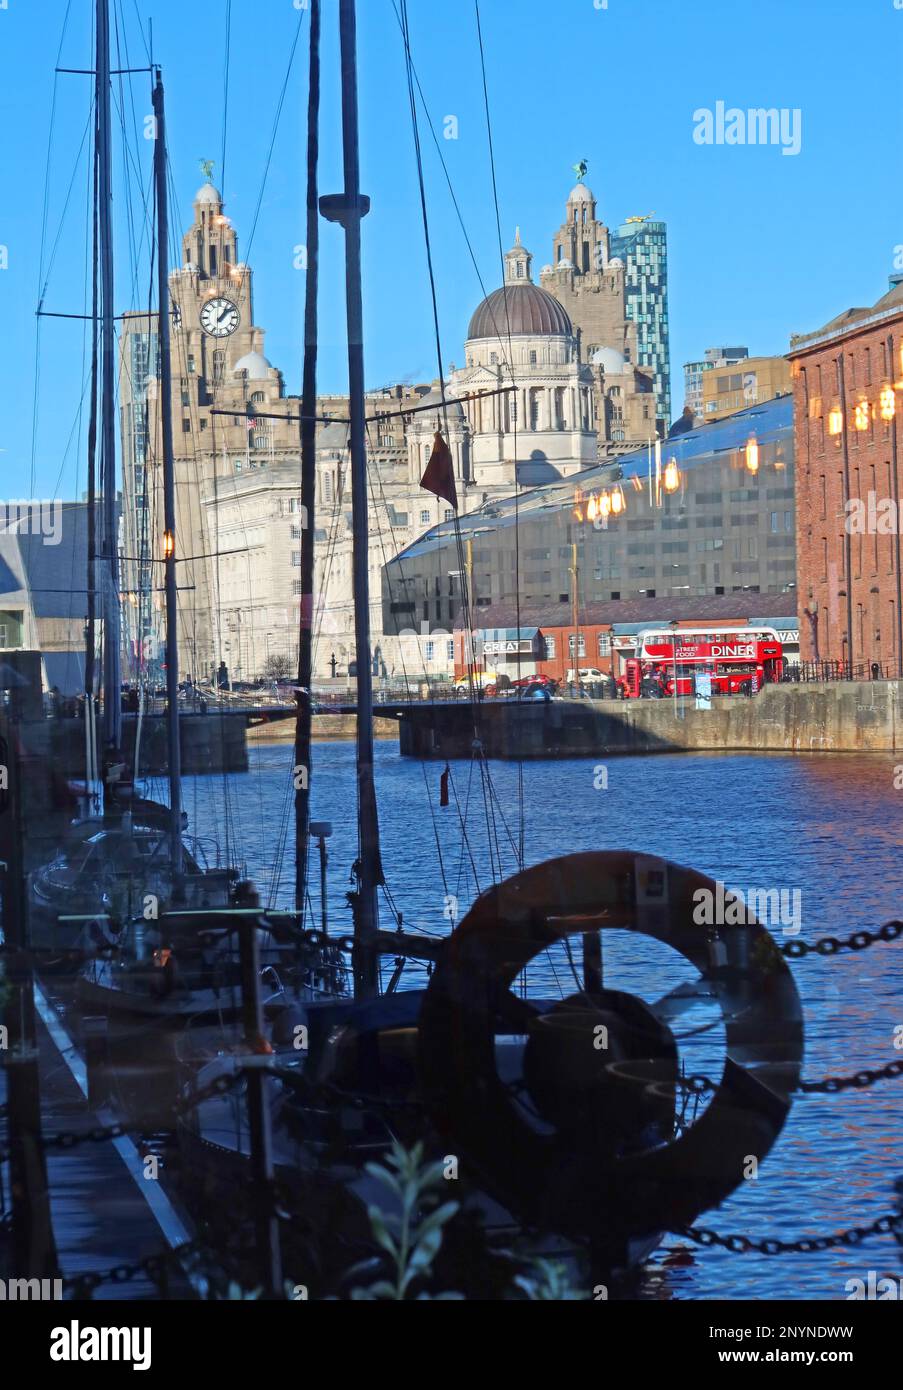 Reflection of the royal Albert Dock and Pier Head Liver buildings, Liverpool in a window, Liverpool, Merseyside, England, GB, Stock Photo